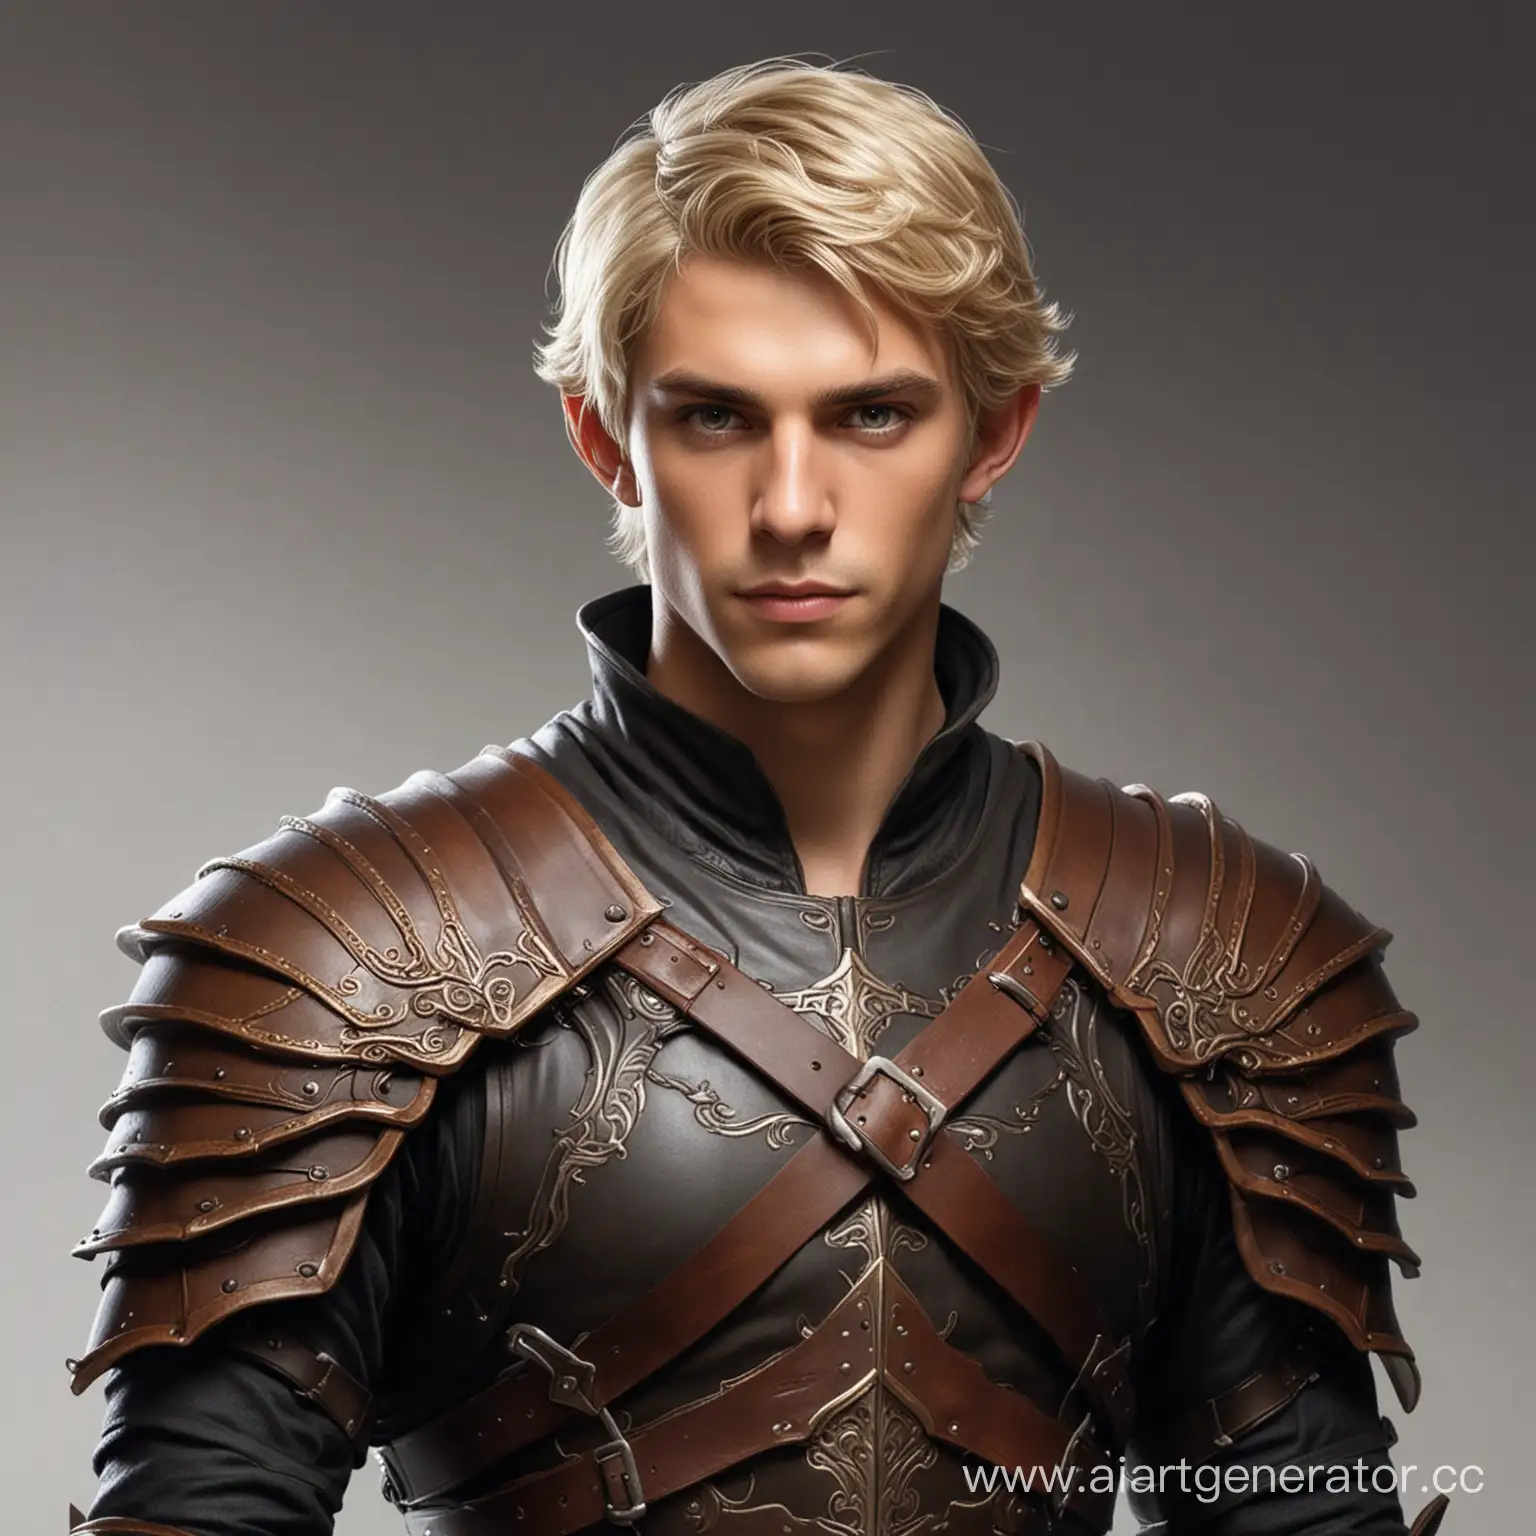 HalfElf-Male-Warrior-in-Leather-Armor-with-Blond-Hair-and-Brown-Eyes